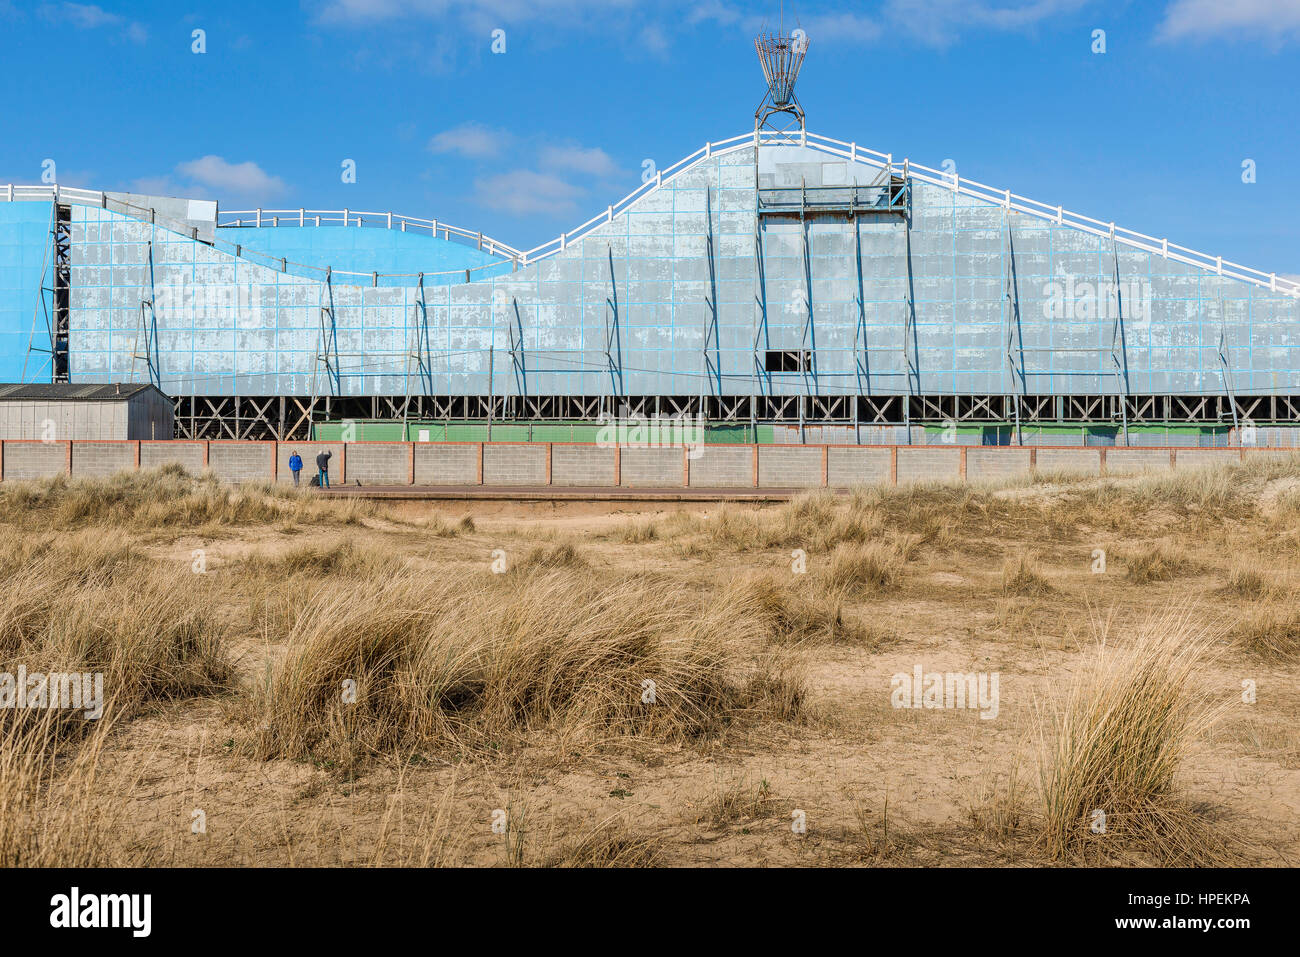 Norfolk coast UK, a view across the sand dunes towards the rear of the roller-coaster ride at Great Yarmouth, UK. Stock Photo